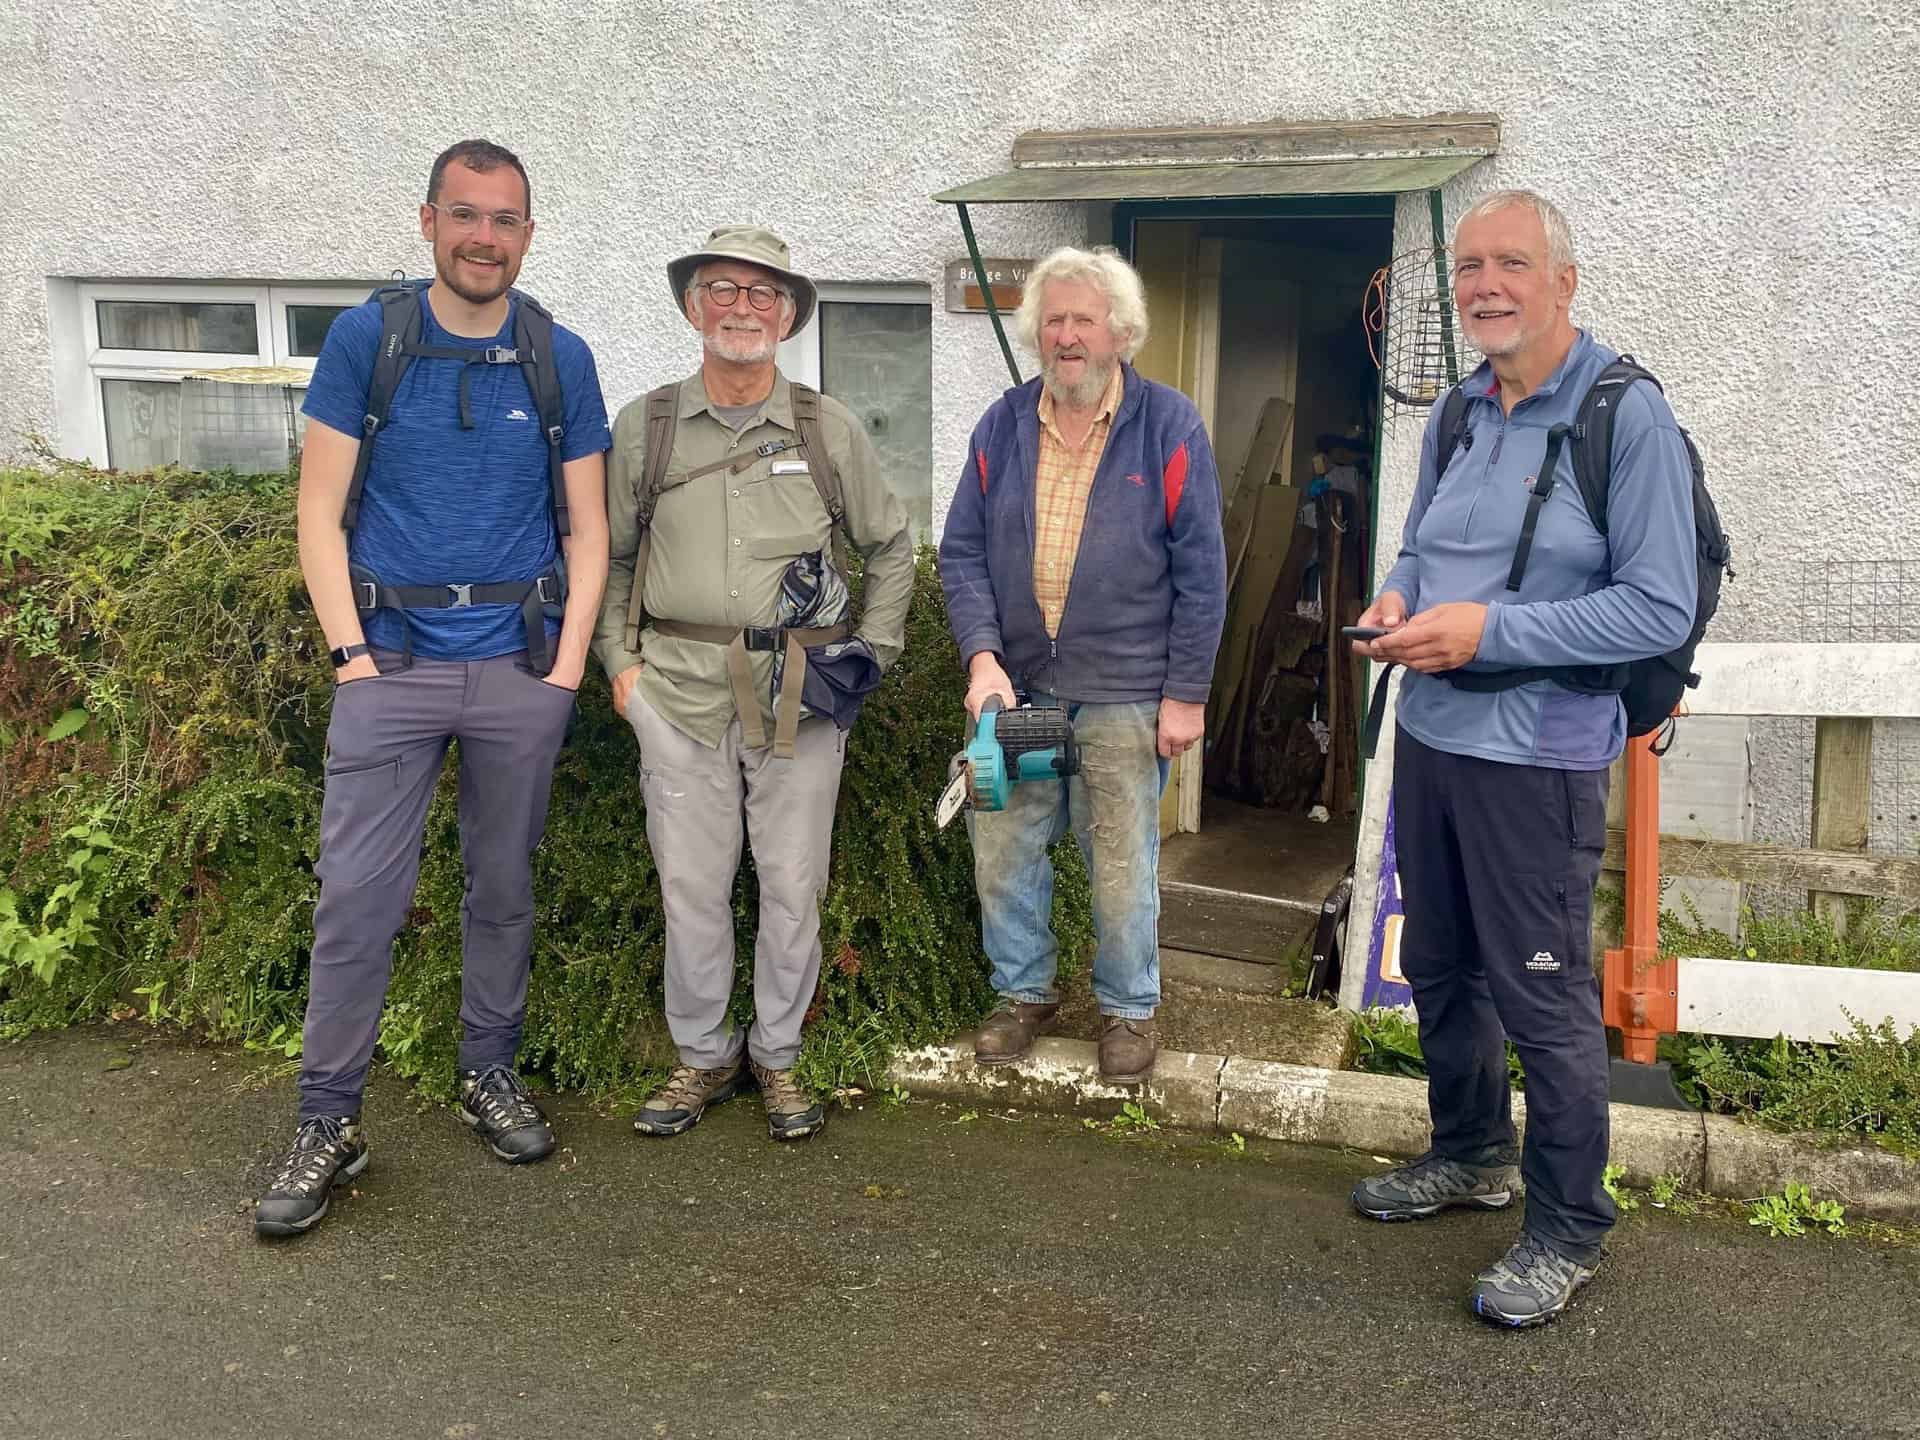 We meet Dockray resident Barrie Quinney, eager to learn about our Stybarrow Dodd walk.